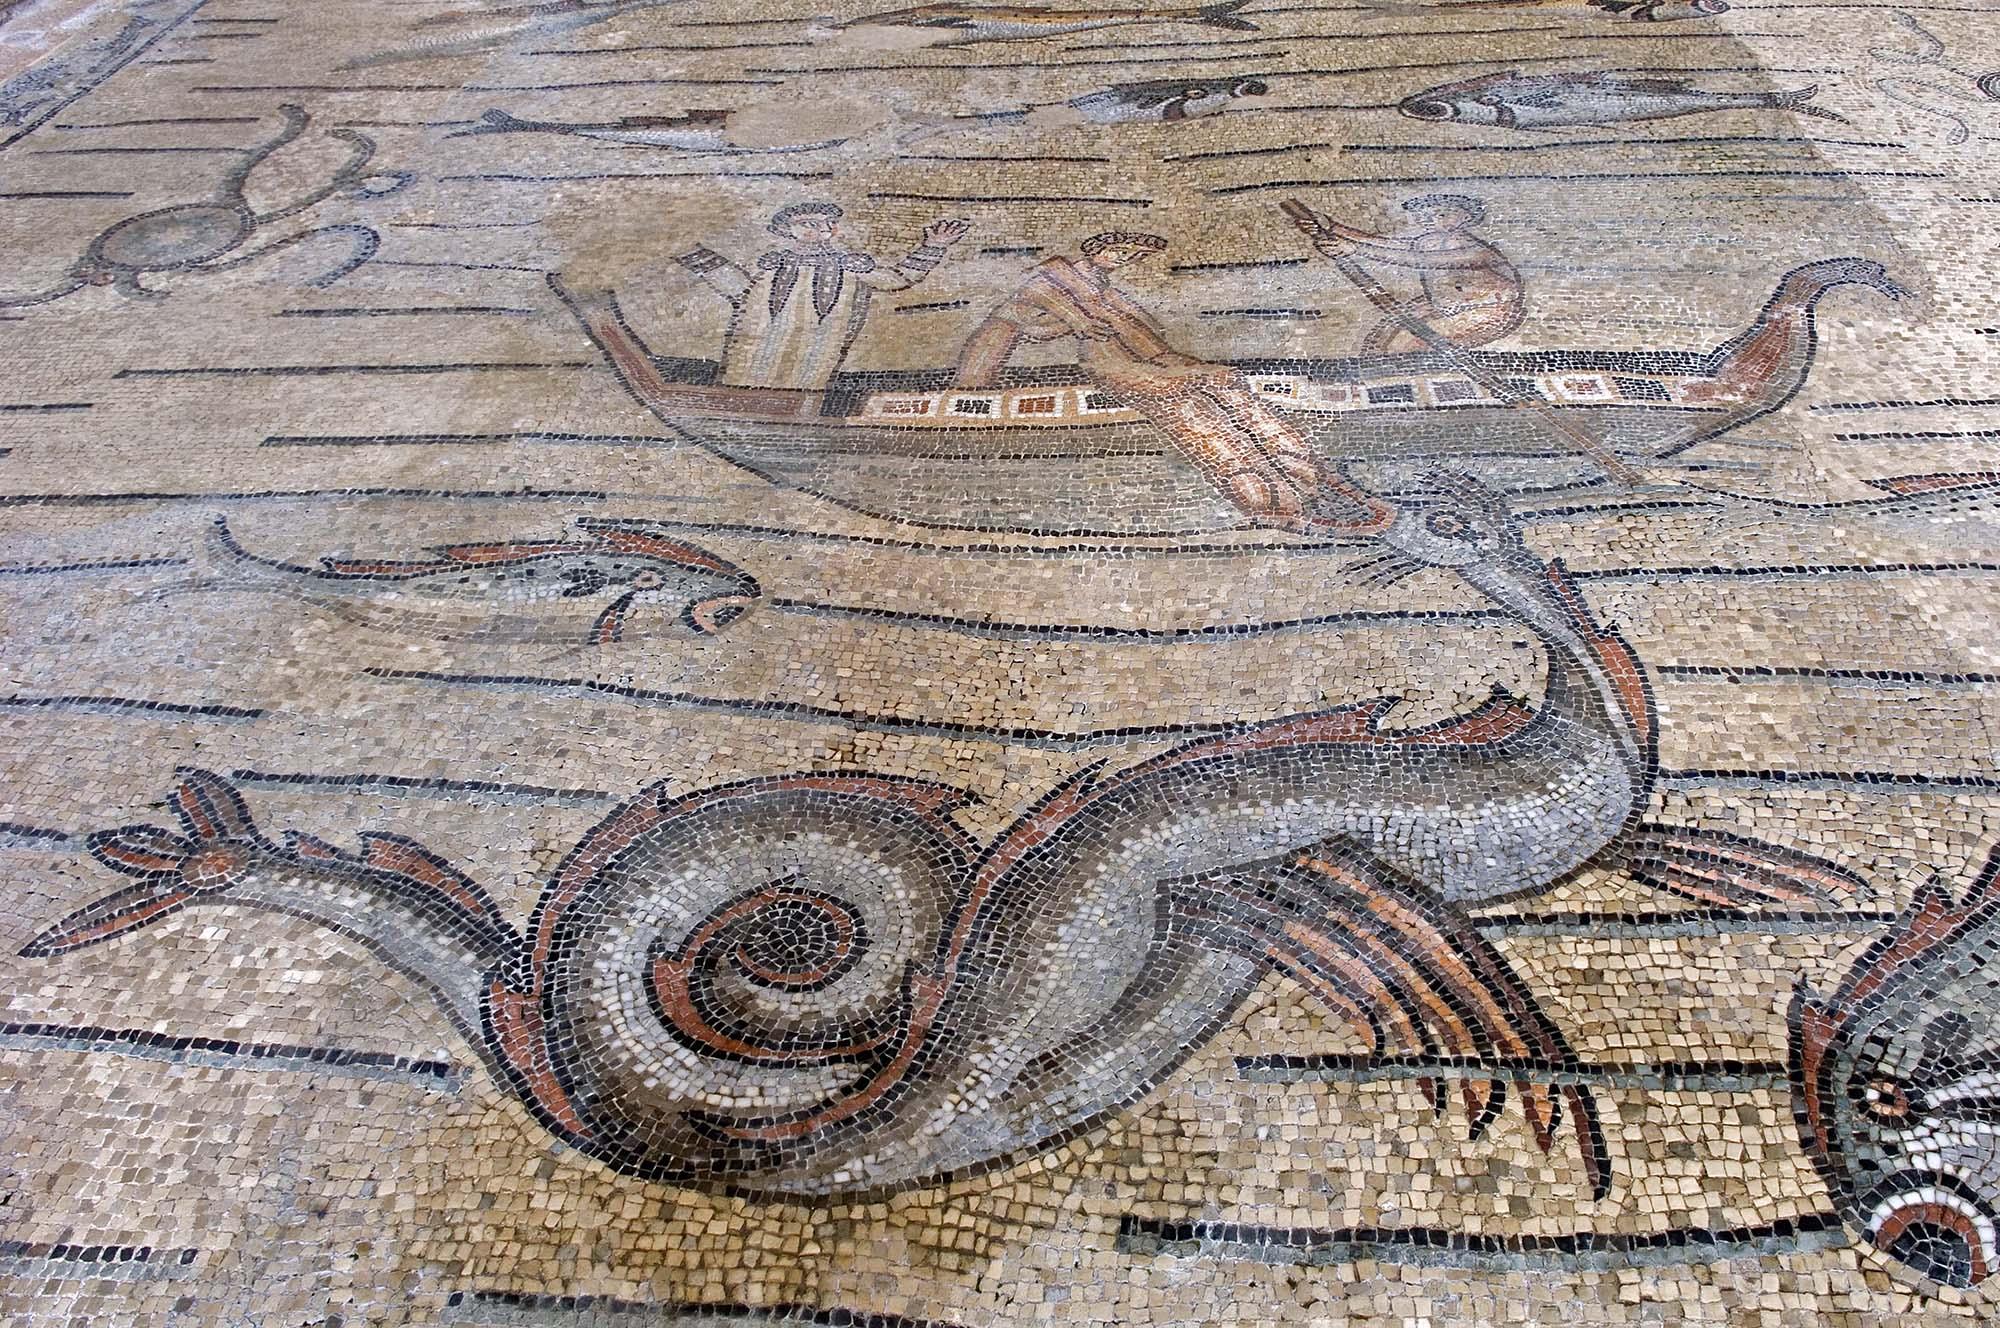 A detail of the cycle of Jonah, where the prophet is being thrown off a boat into the sea and swallowed up by a sea monster. – © Gianluca Baronchelli